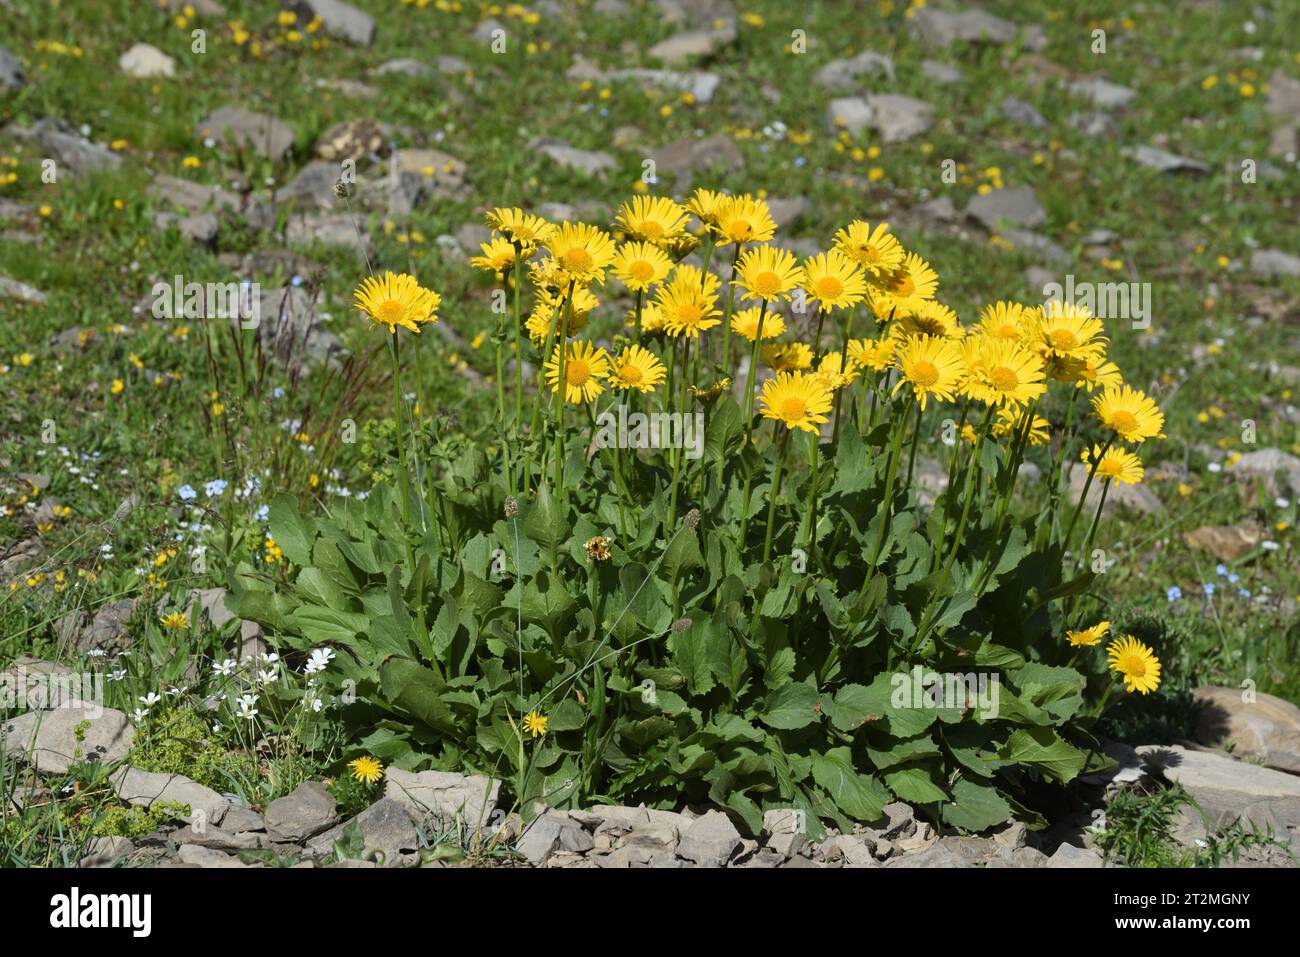 Clump of Yellow Leopard's Bane, Doronicum grandiflorum, in the Daisy or Aster Family Asteraceae. Stock Photo